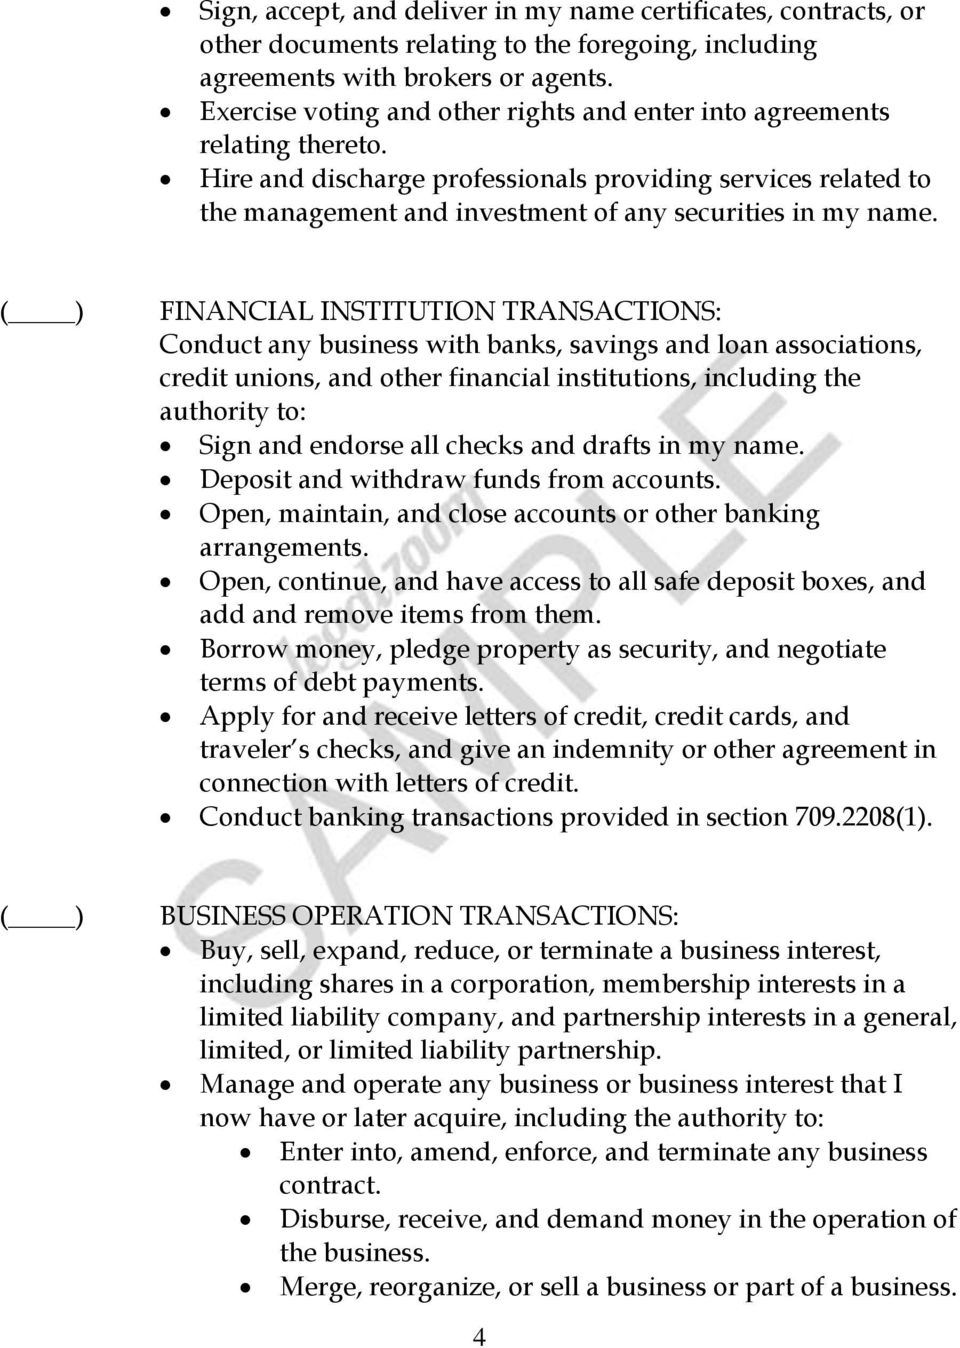 FINANCIAL INSTITUTION TRANSACTIONS: Conduct any business with banks, savings and loan associations, credit unions, and other financial institutions, including the authority to: Sign and endorse all